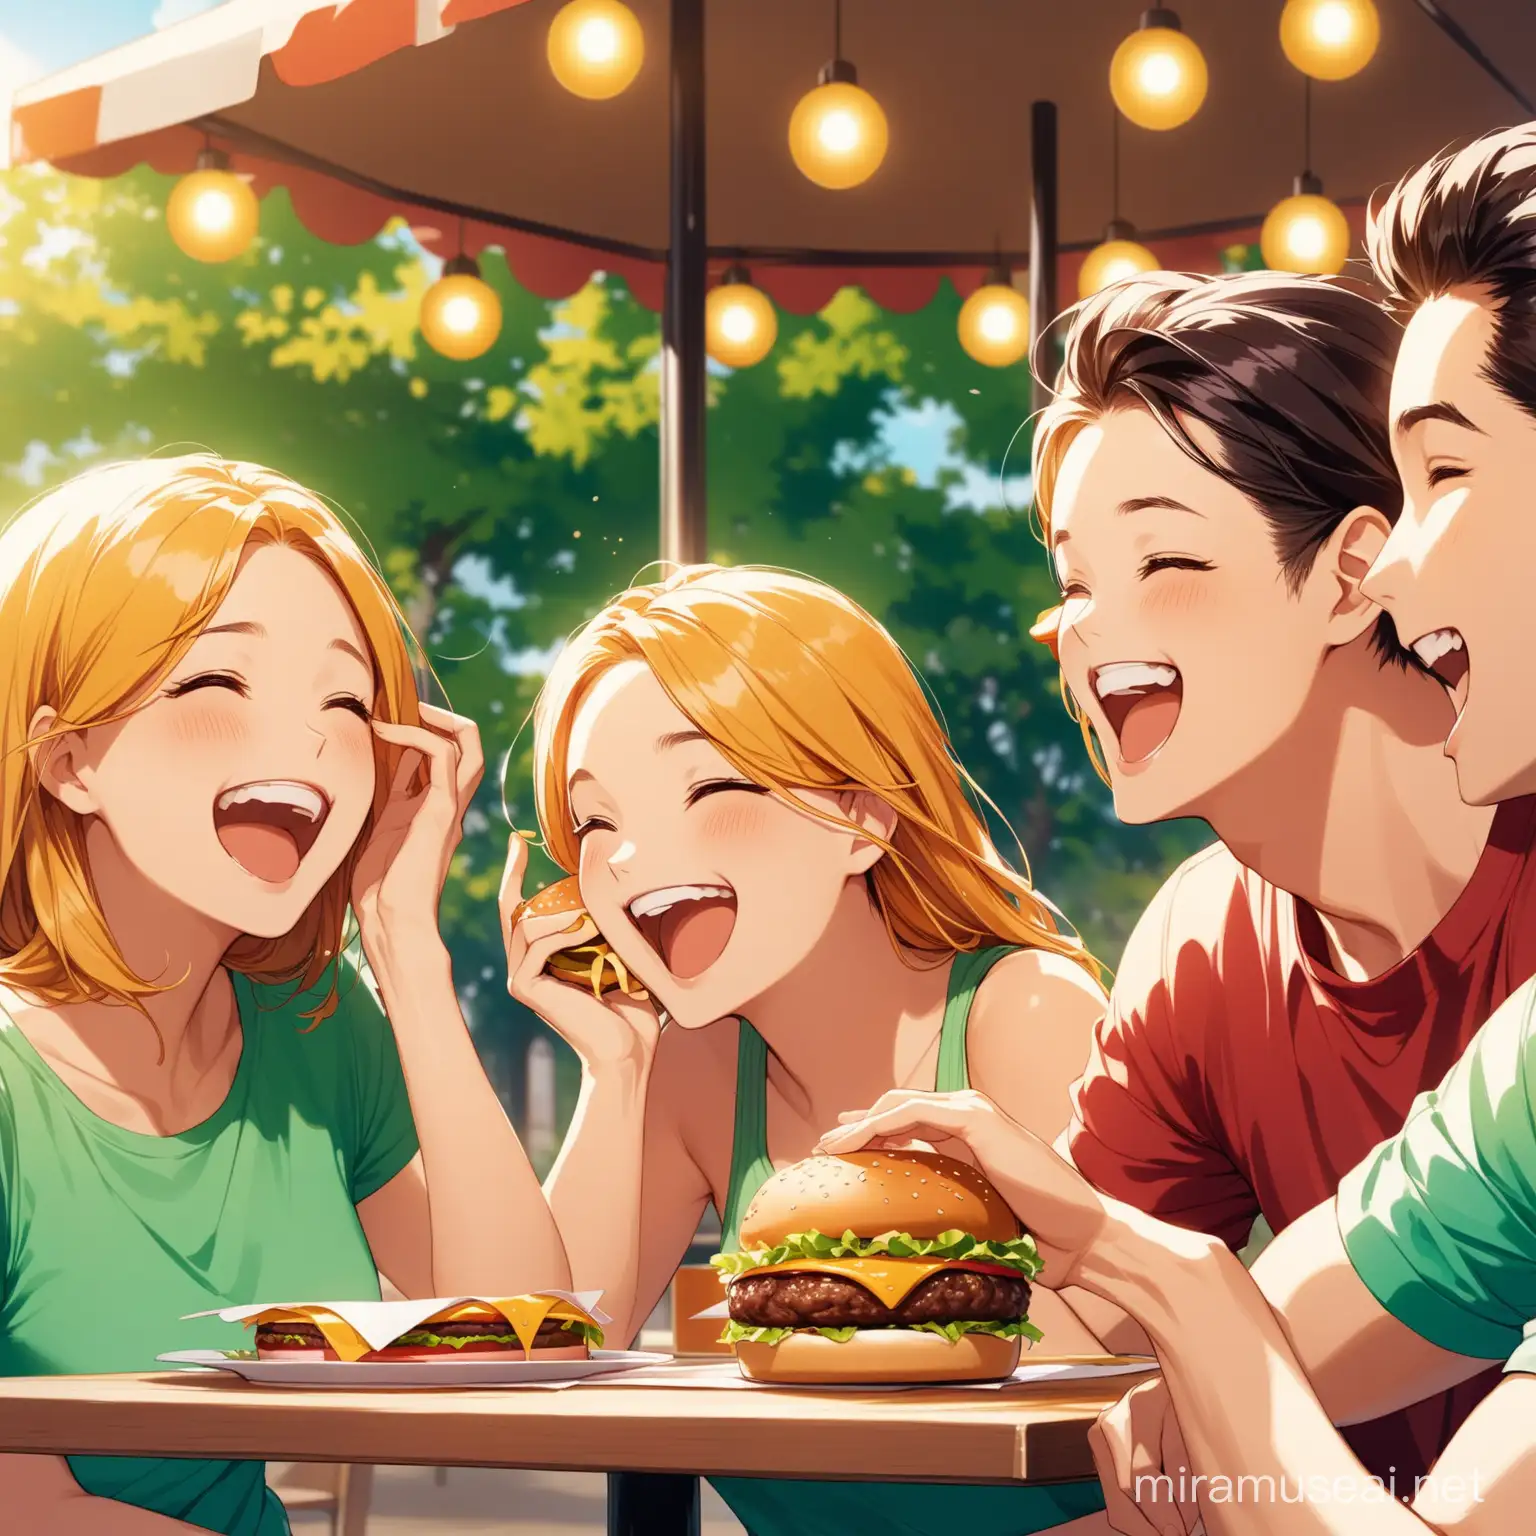 A burger in a nice place together with friends lauging

